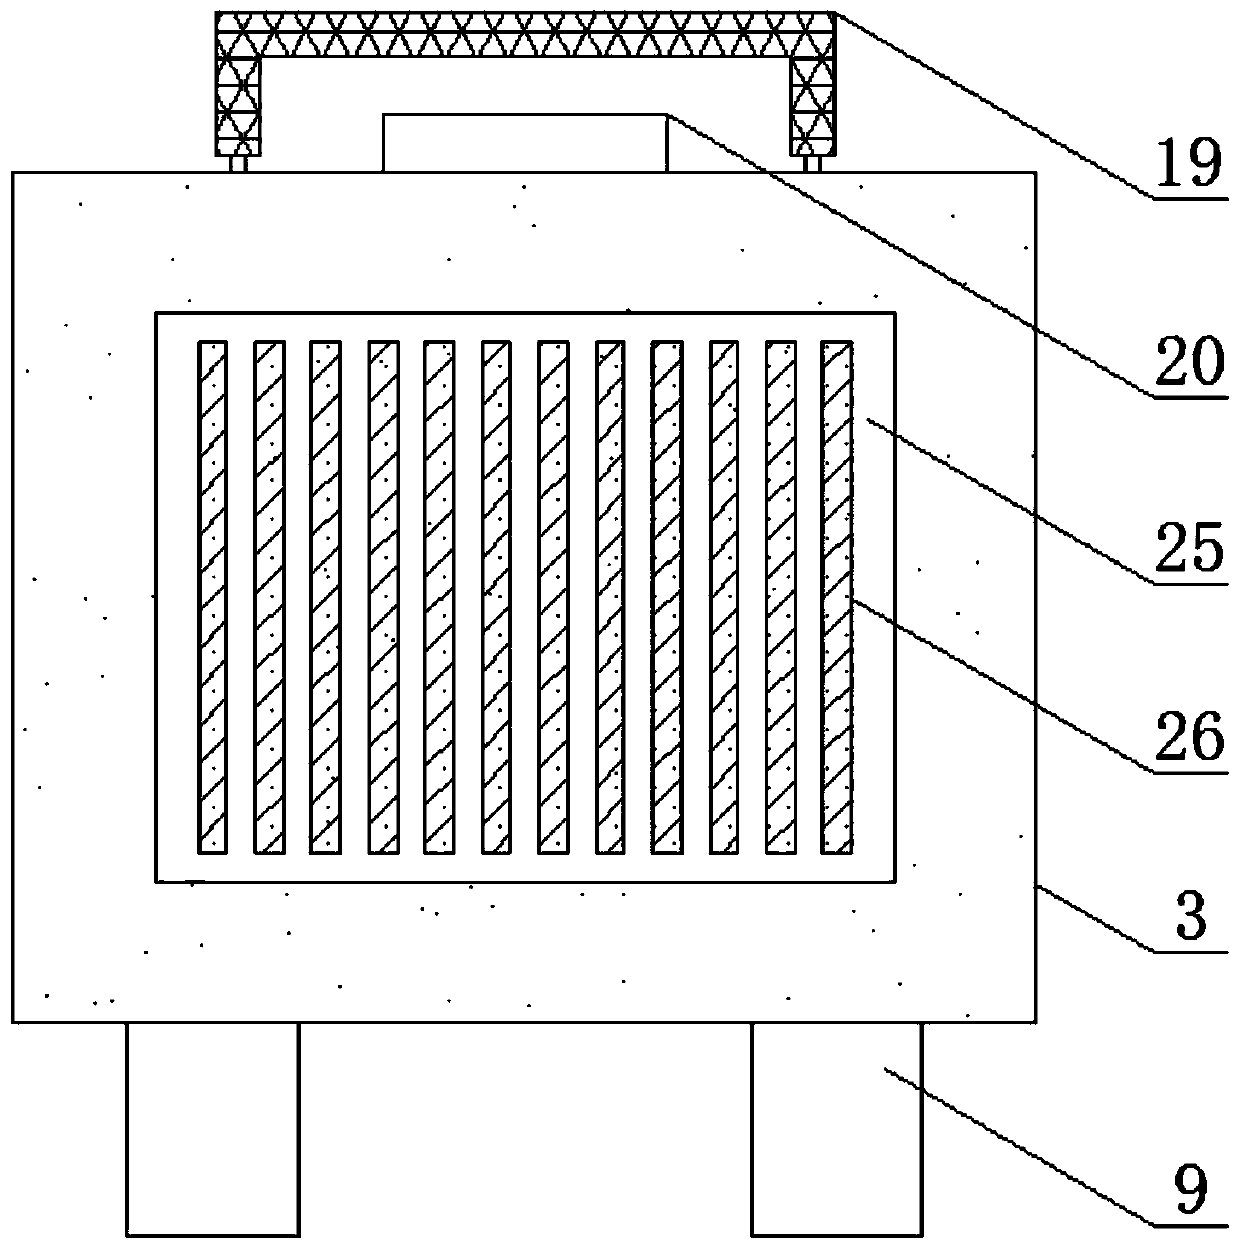 Storage device for selling electronic products